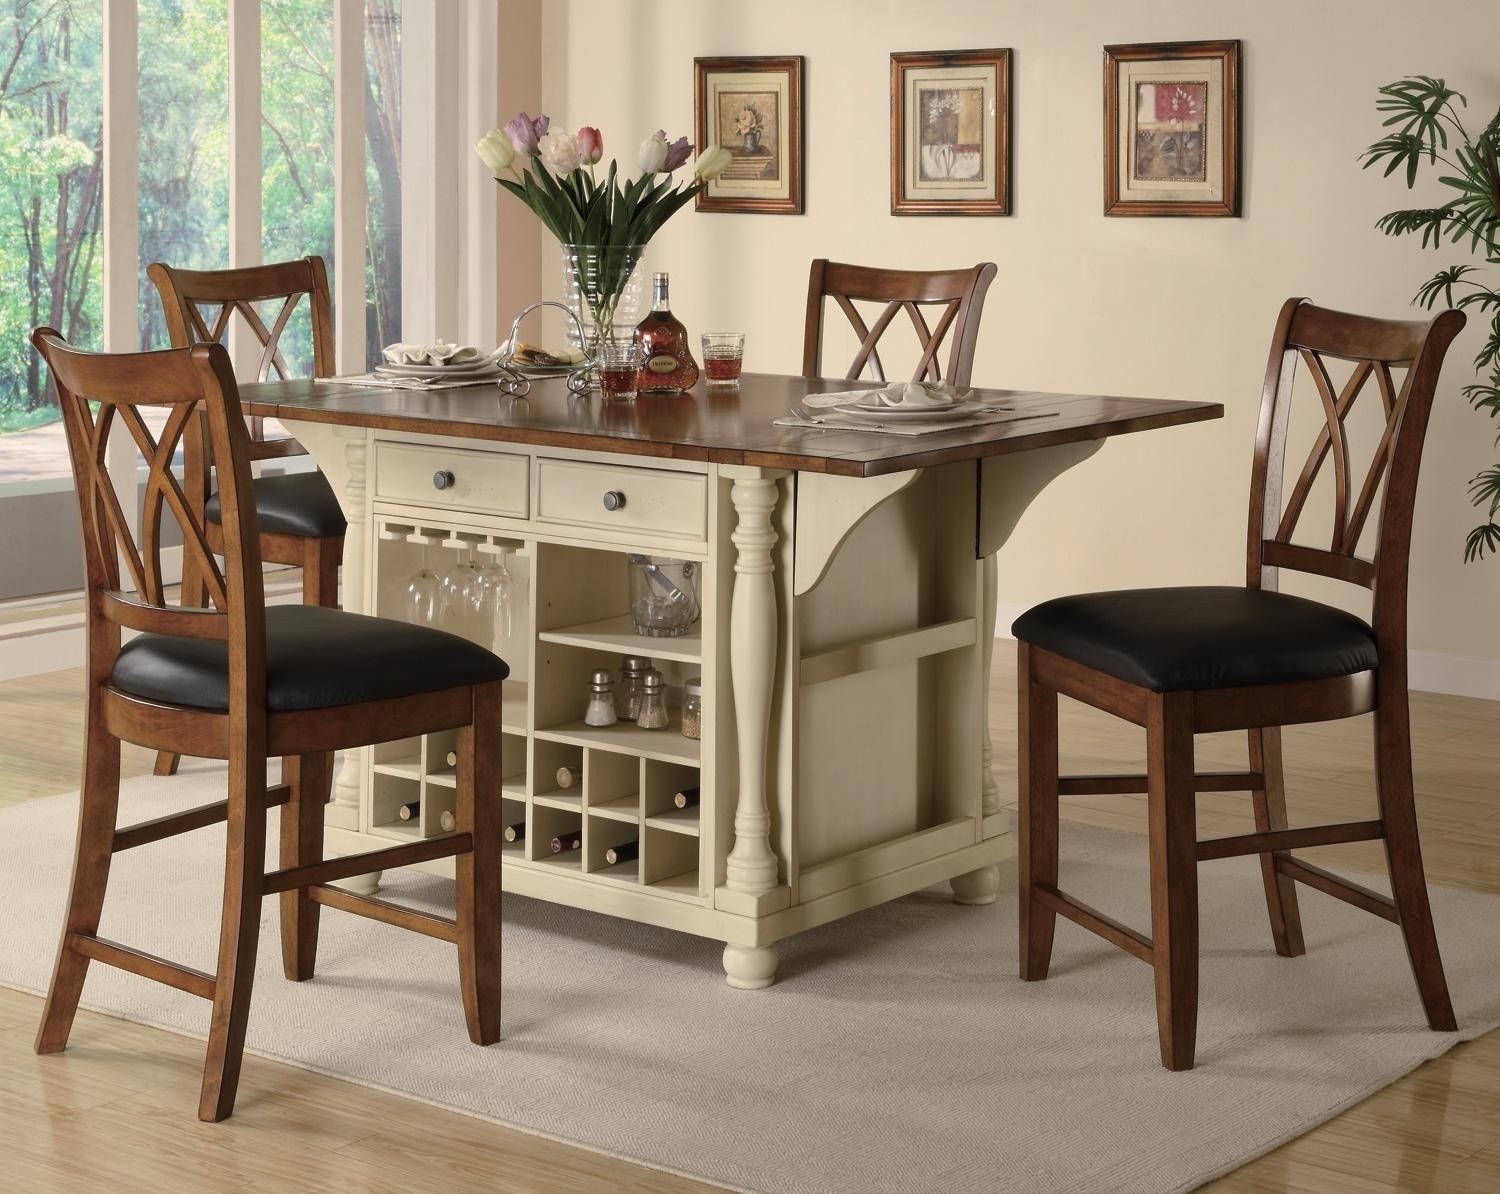 Dinette sets kitchen table and furniture counter height stools